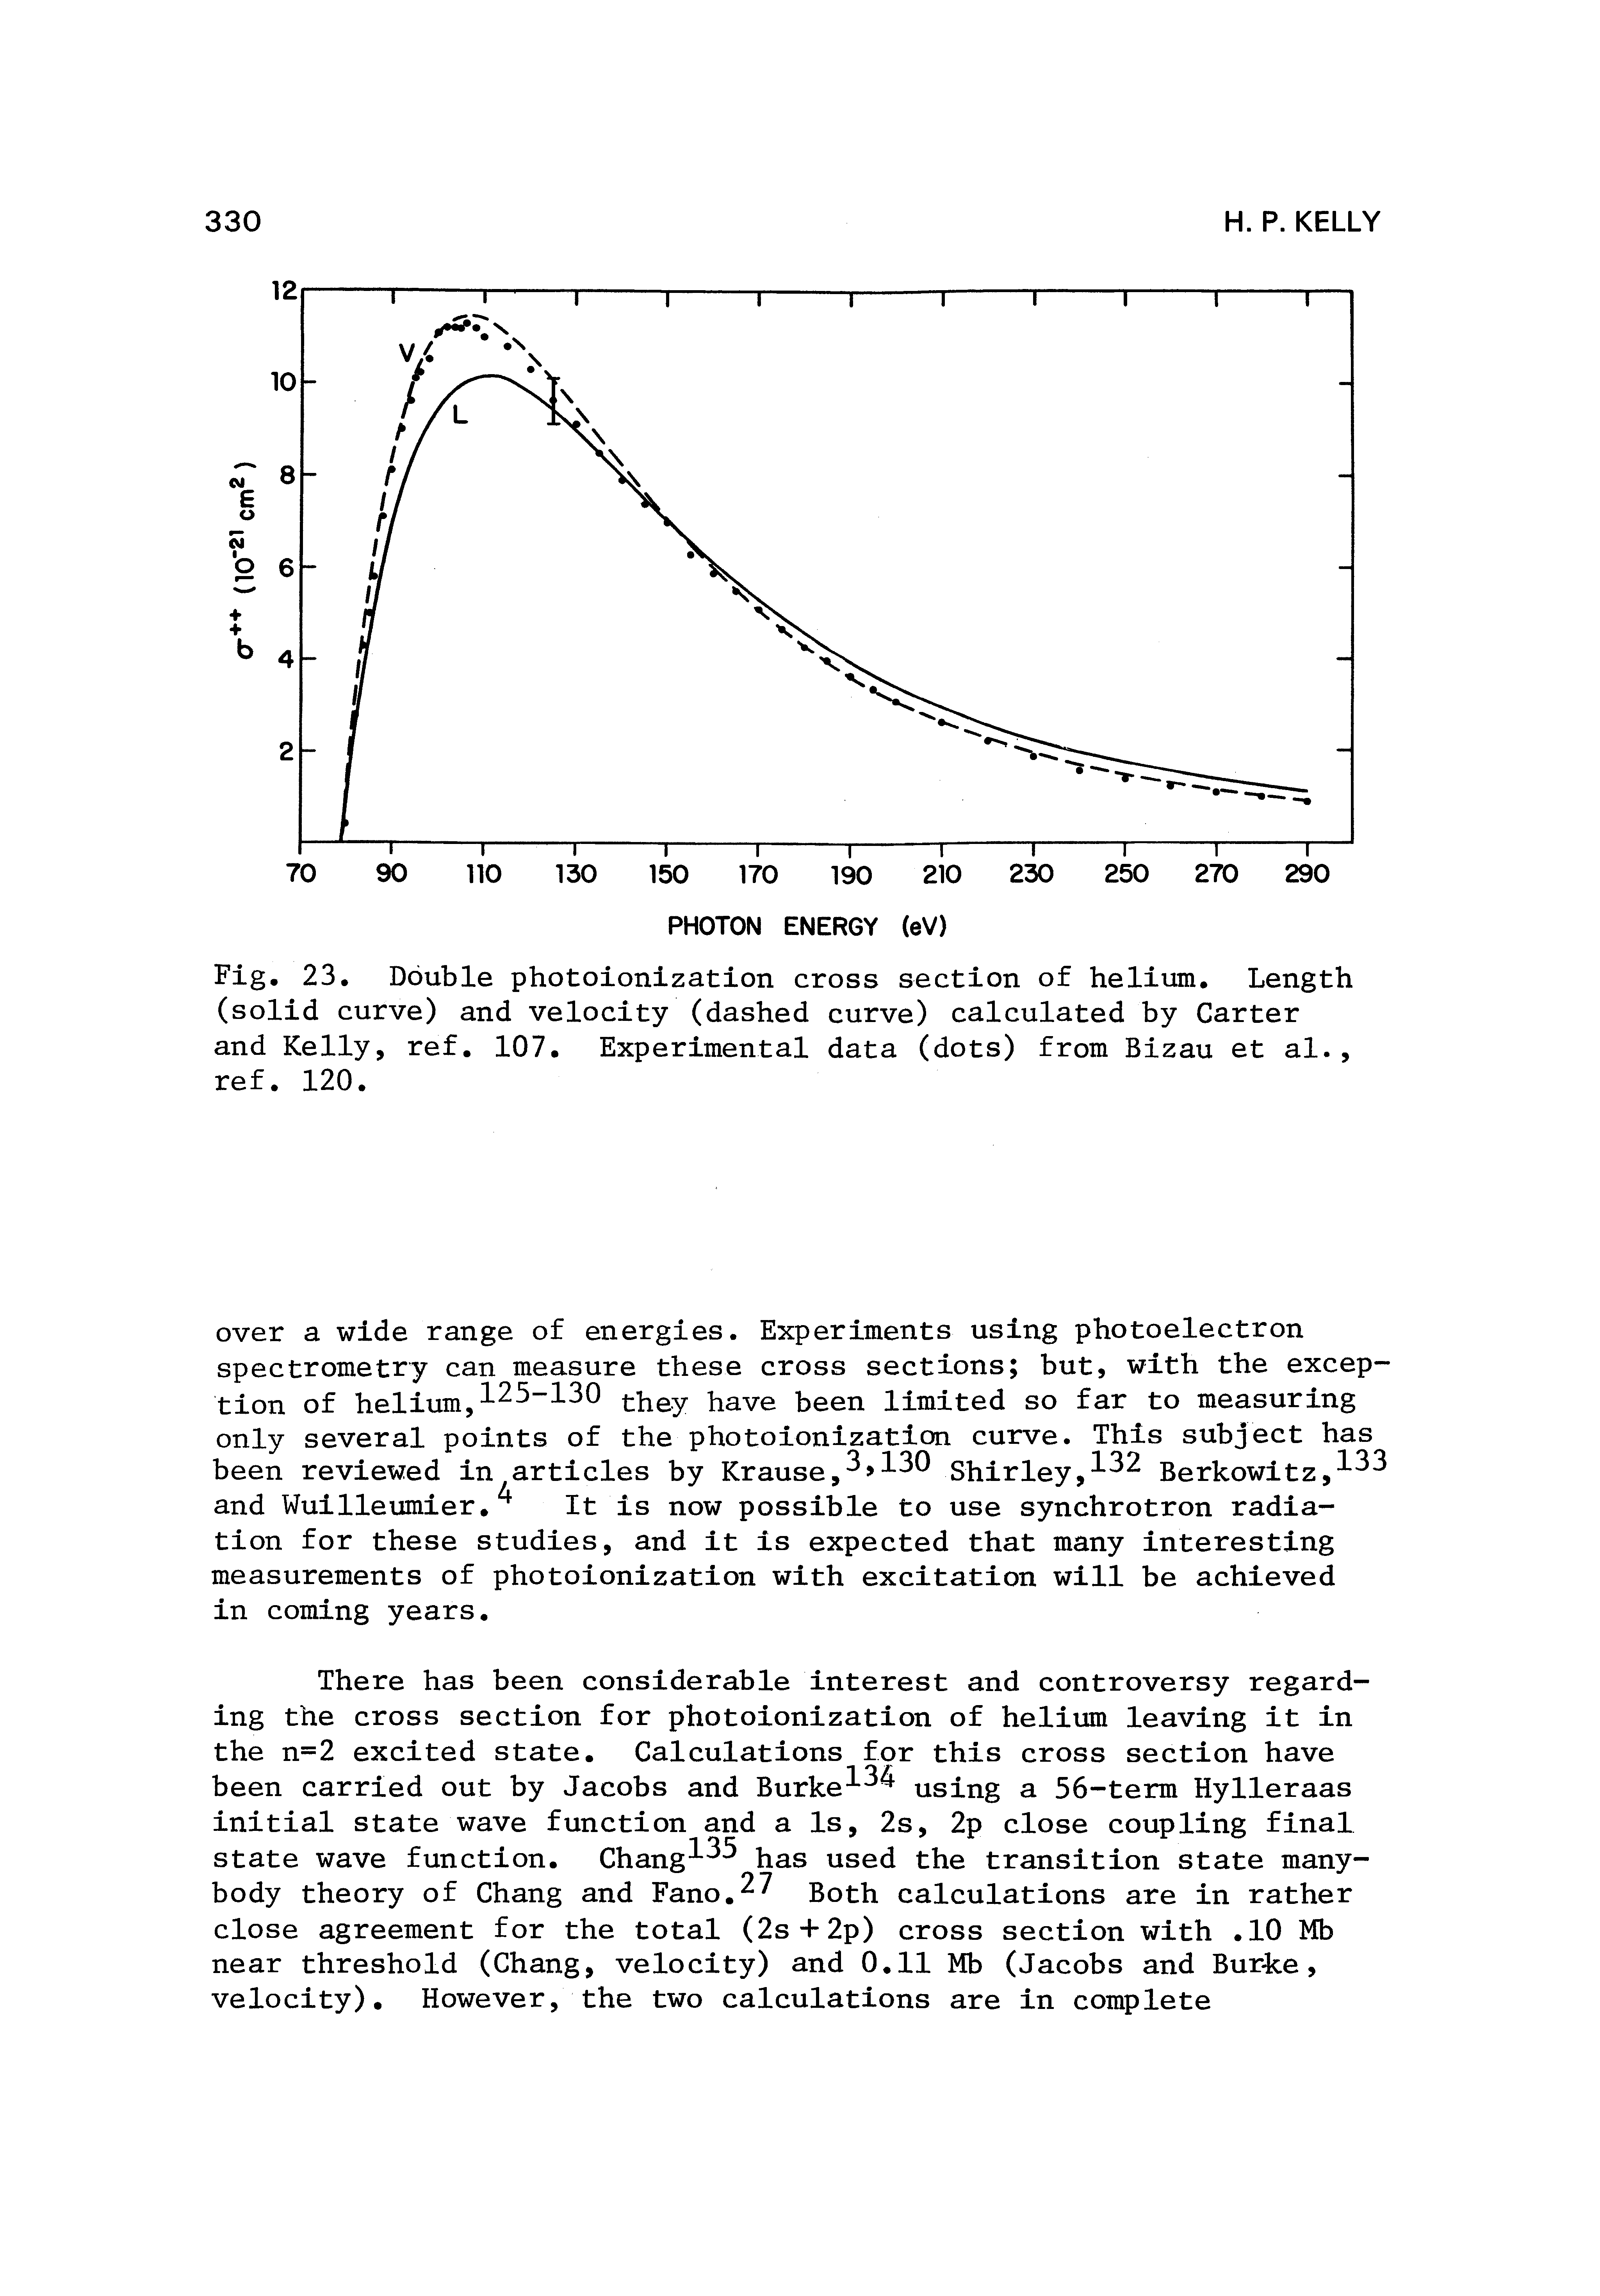 Fig. 23. Double photoionization cross section of helium. Length (solid curve) and velocity (dashed curve) calculated by Carter and Kelly, ref. 107. Experimental data (dots) from Bizau et al., ref. 120.